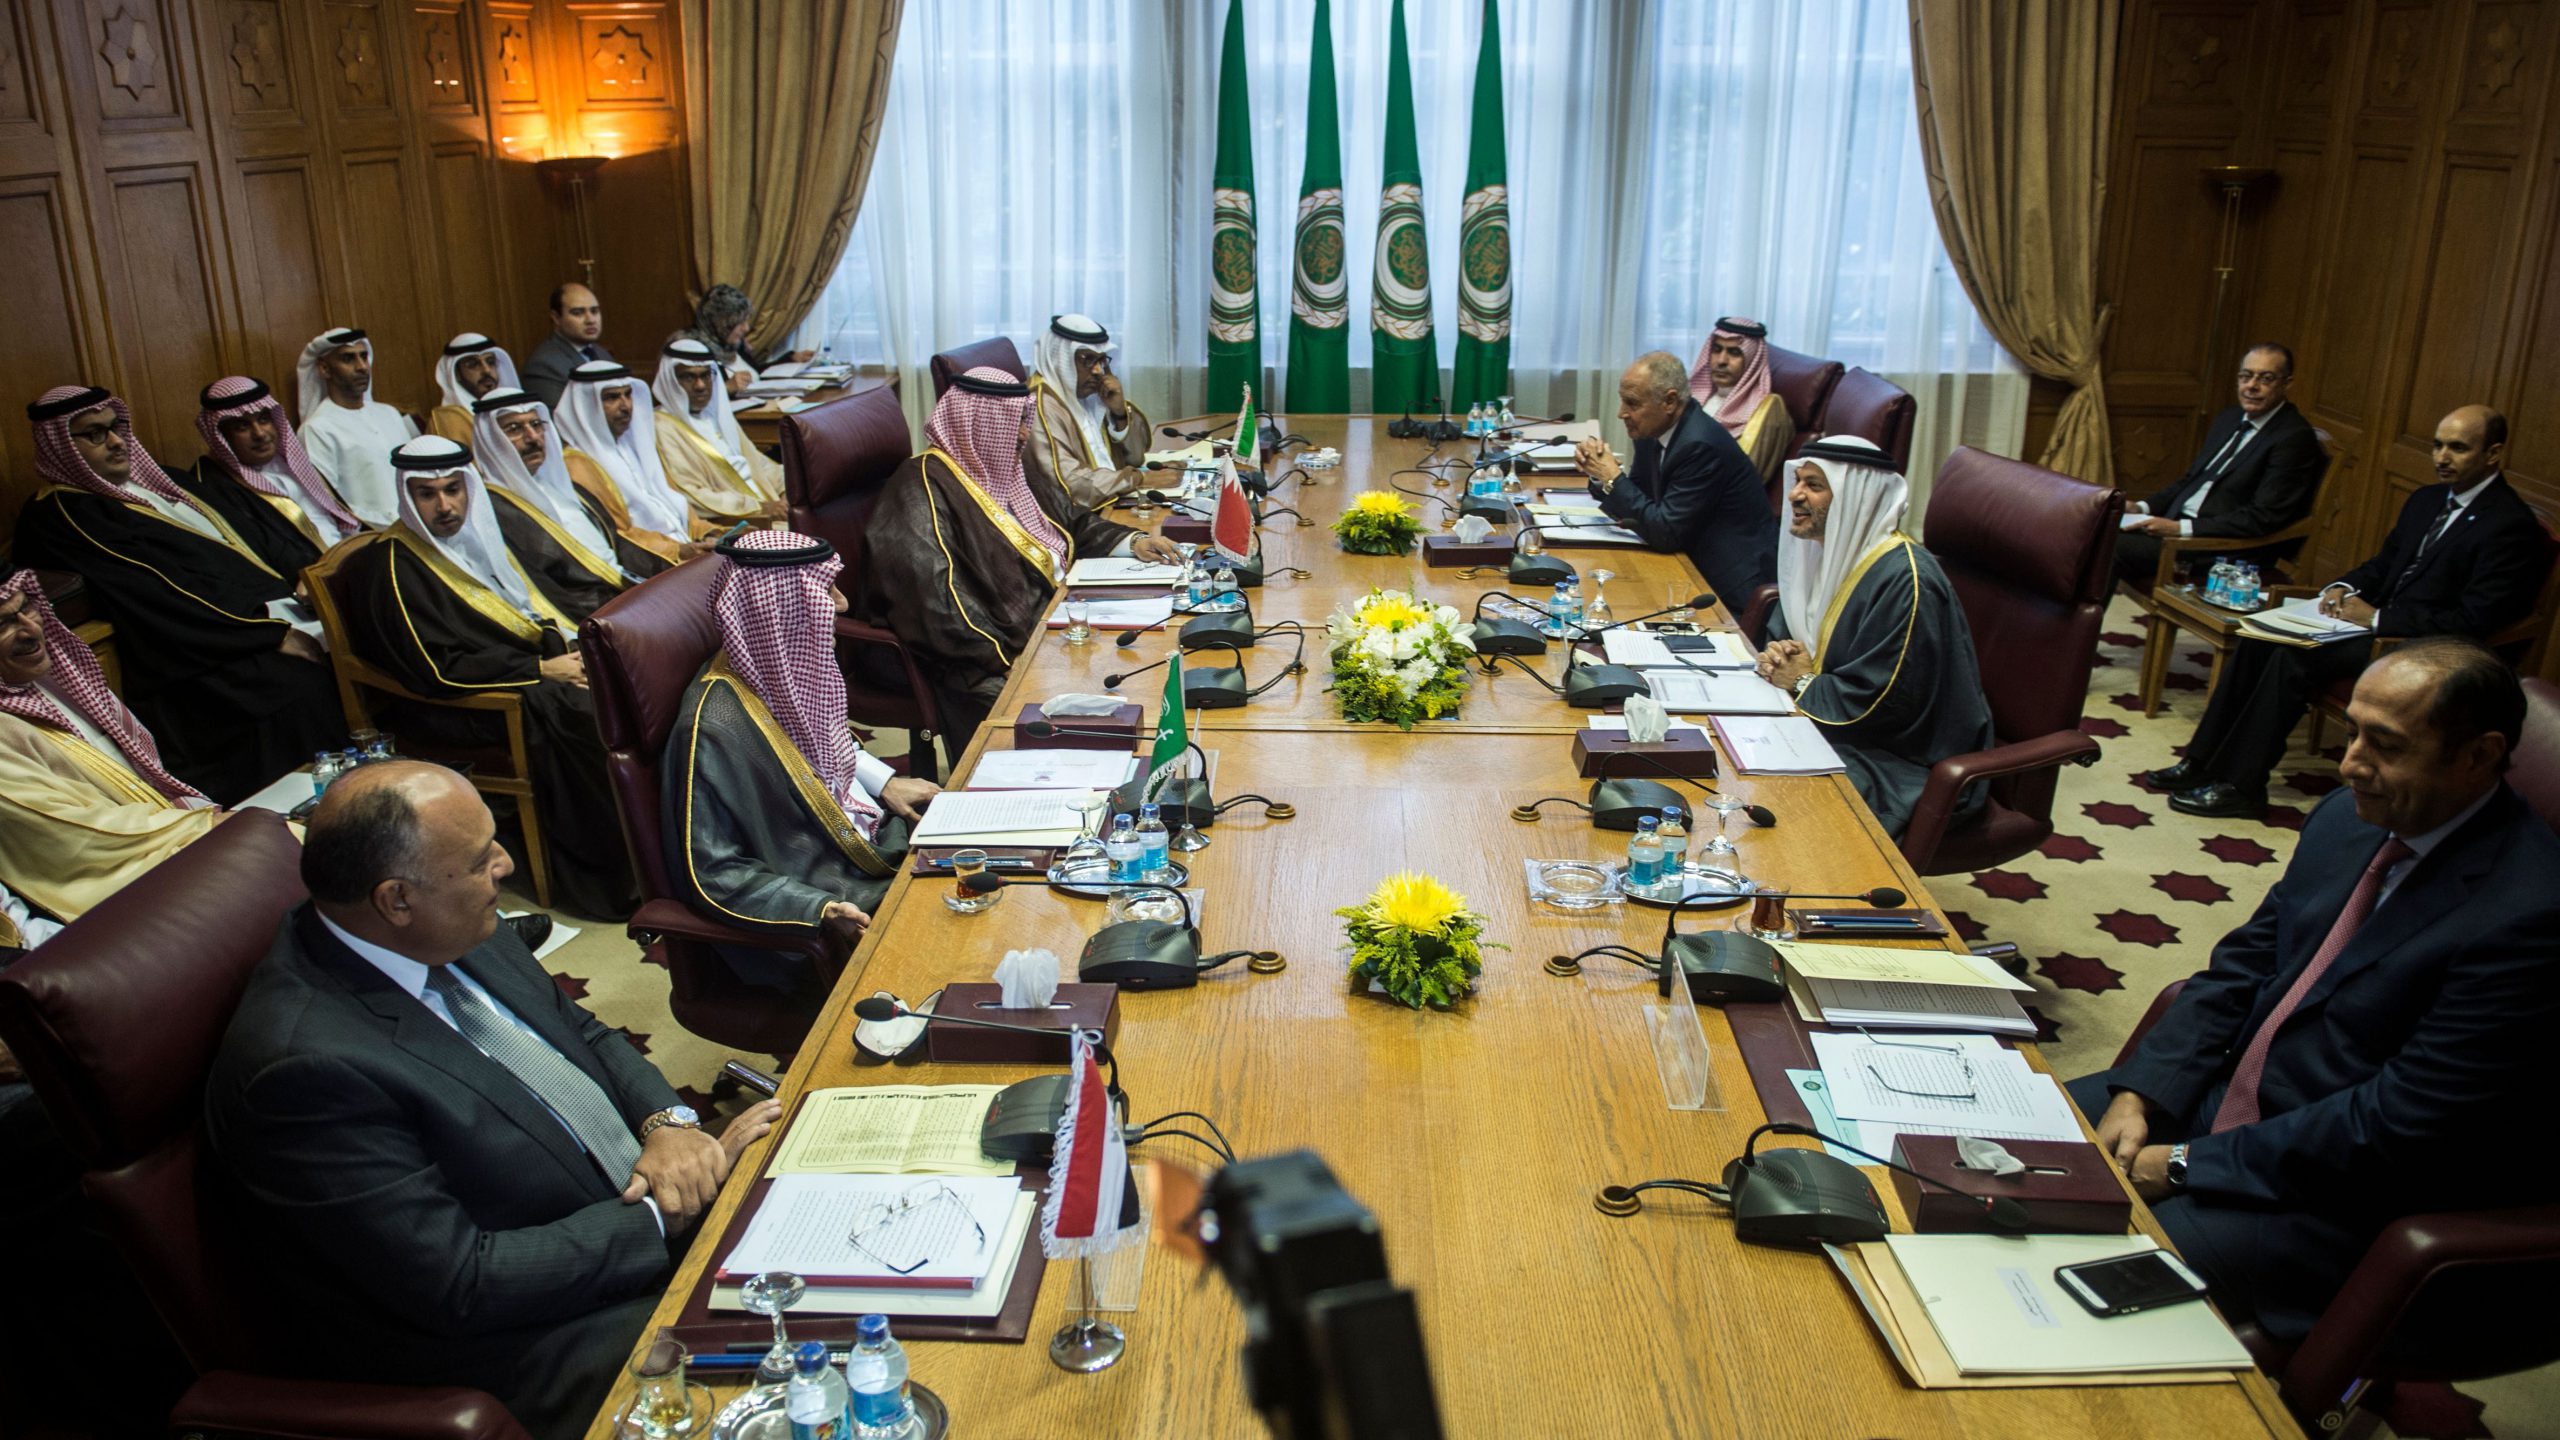 Foreign minsters of Arab League states gather in a meeting at the organization's headquarters in Cairo.